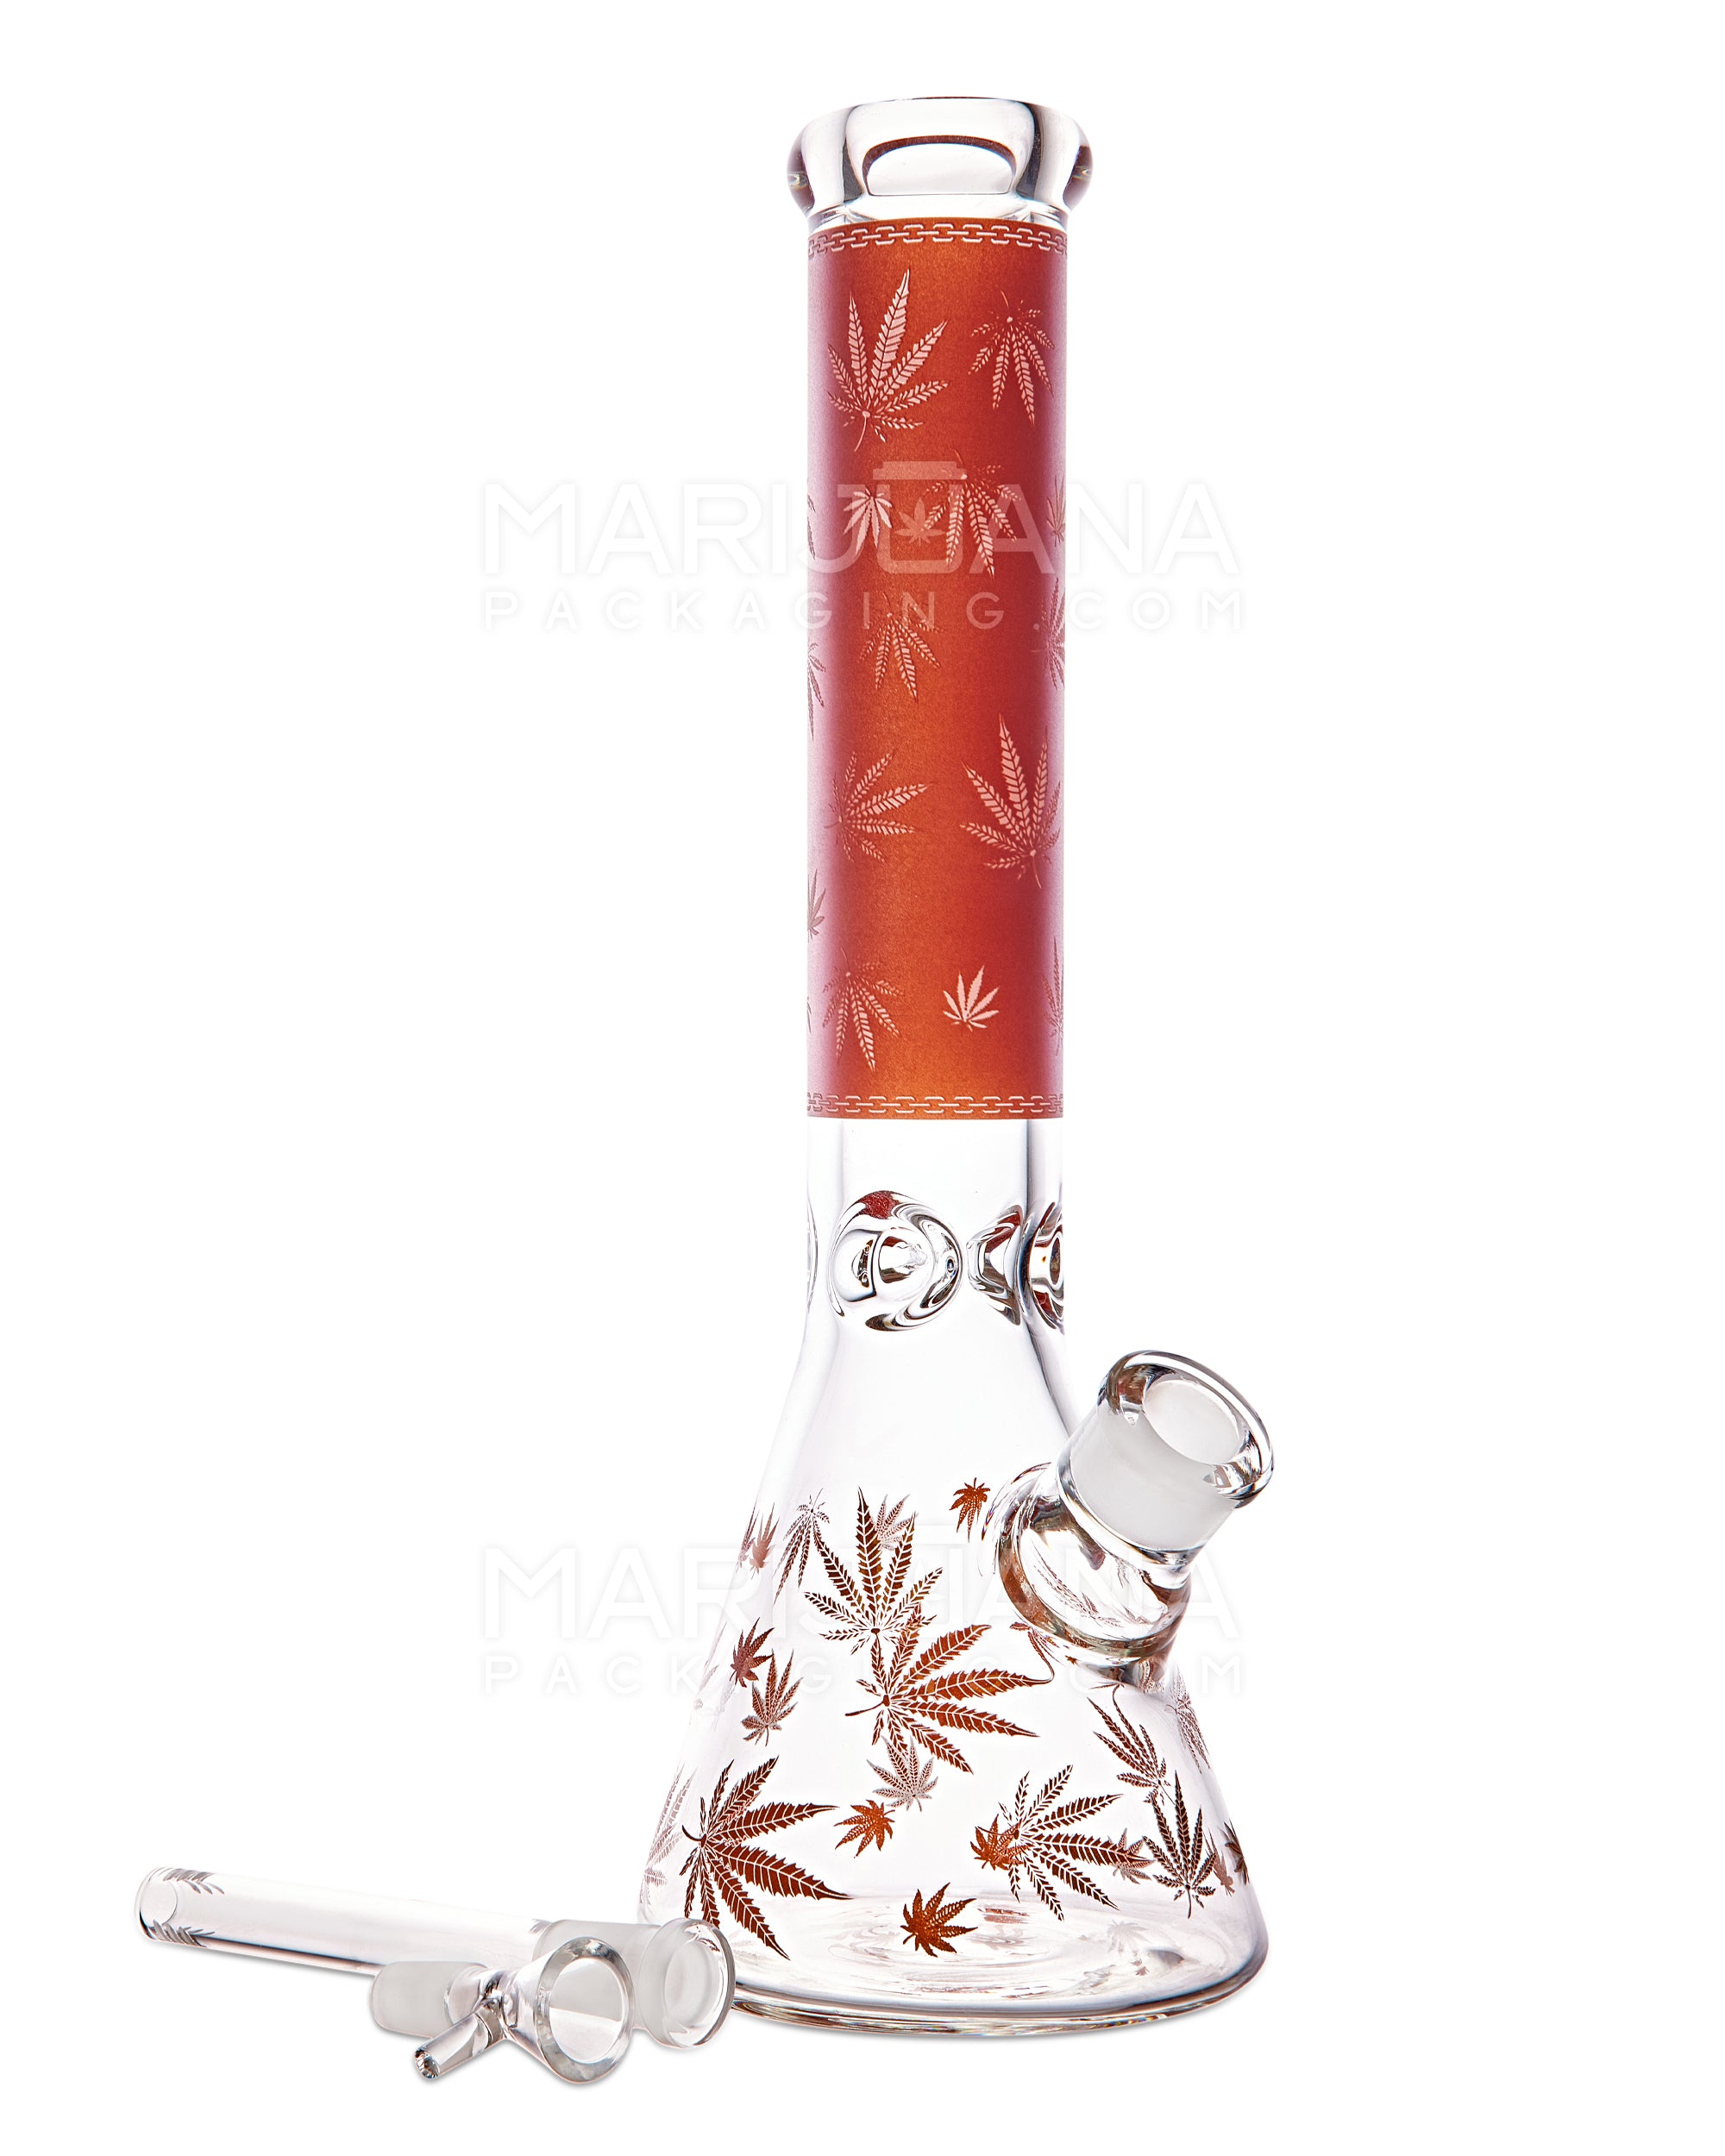 Straight Neck Decal Diffused Thick Glass Beaker Water Pipe w/ Ice Catcher | 14in Tall - 14mm Bowl - Rose Gold - 2